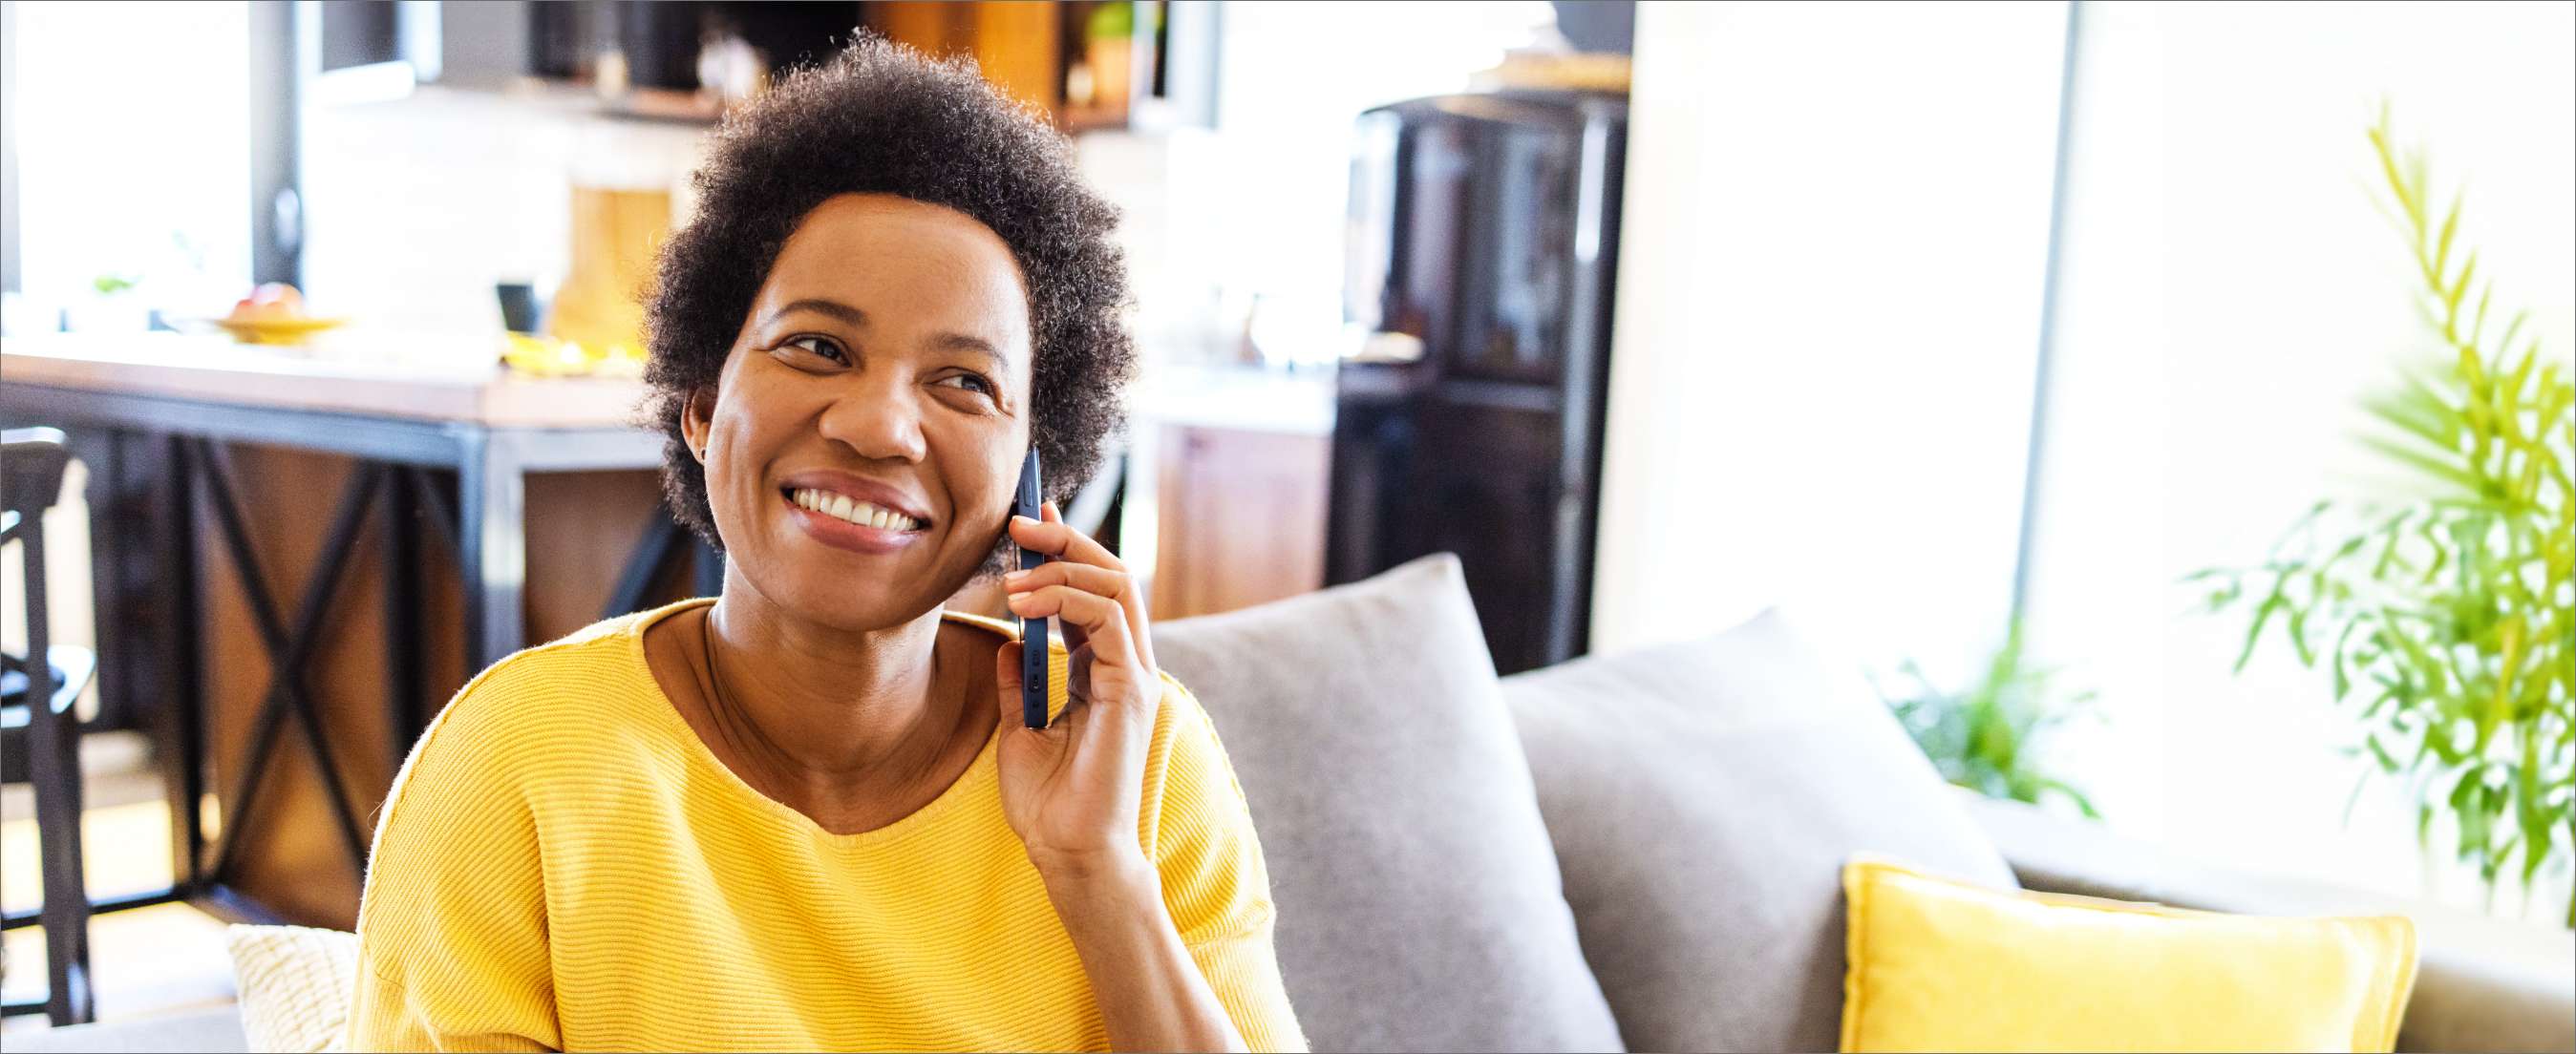 Mid adult black woman in yellow shirt sitting on the couch in the living room and talking on the phone, smiling.